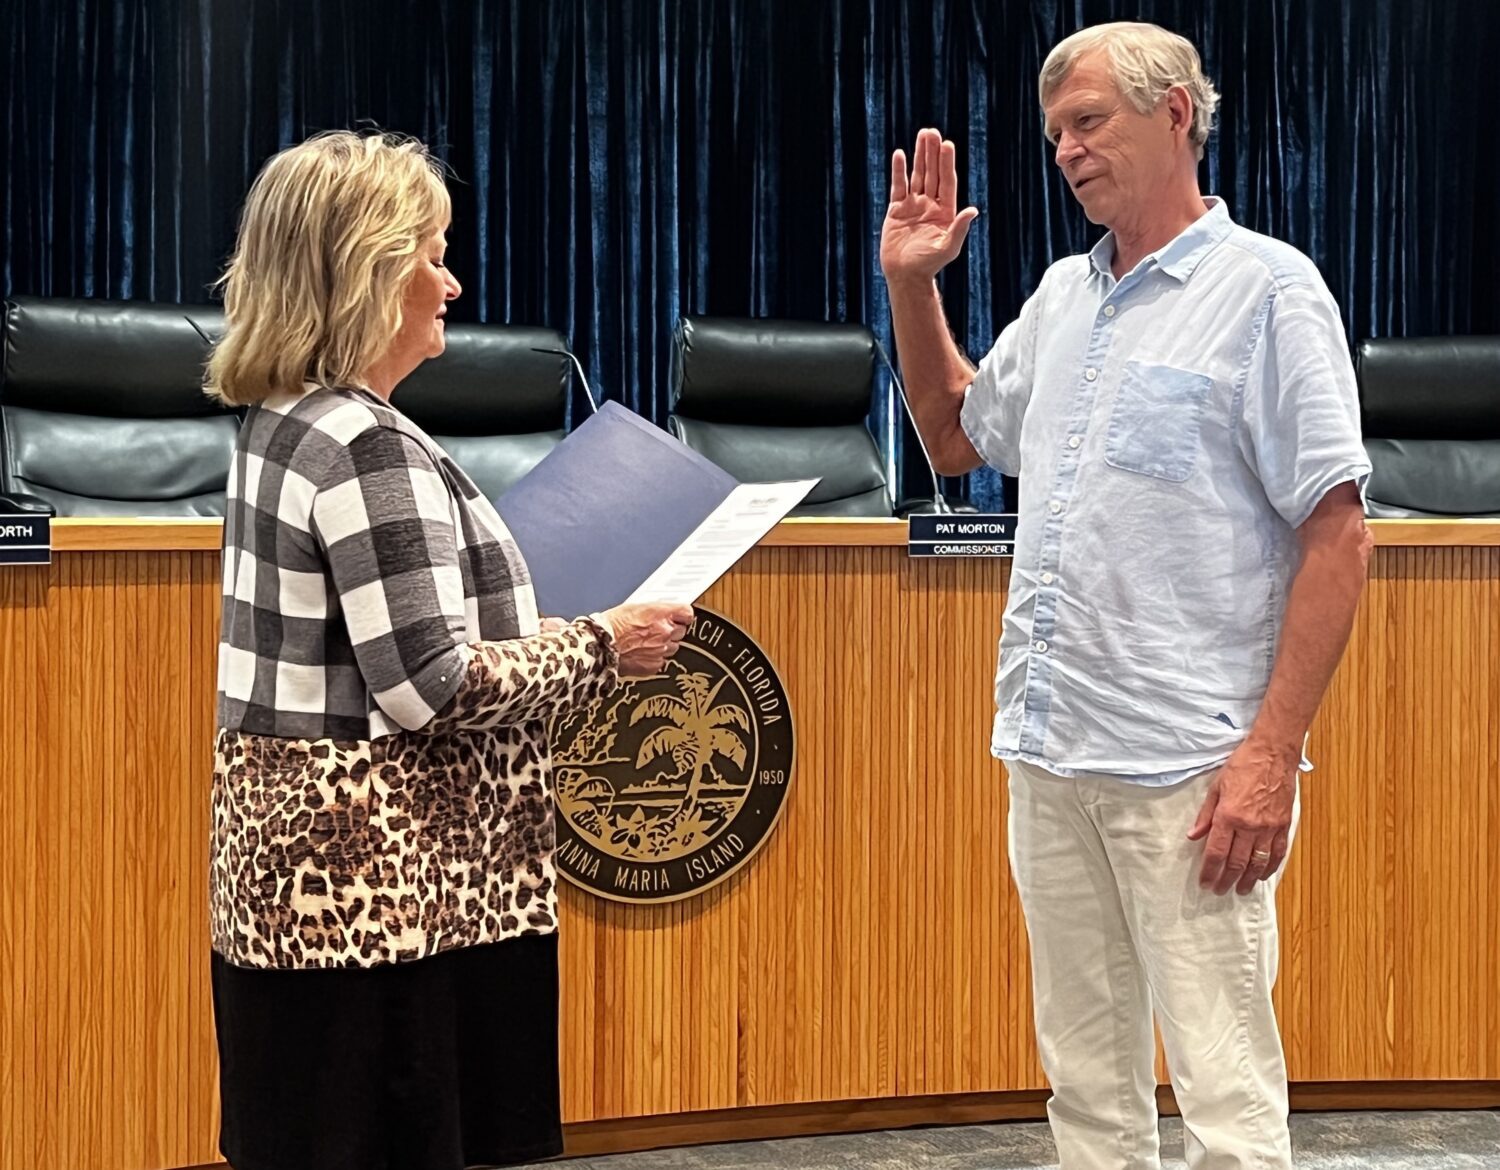 New Holmes Beach commissioners sworn in